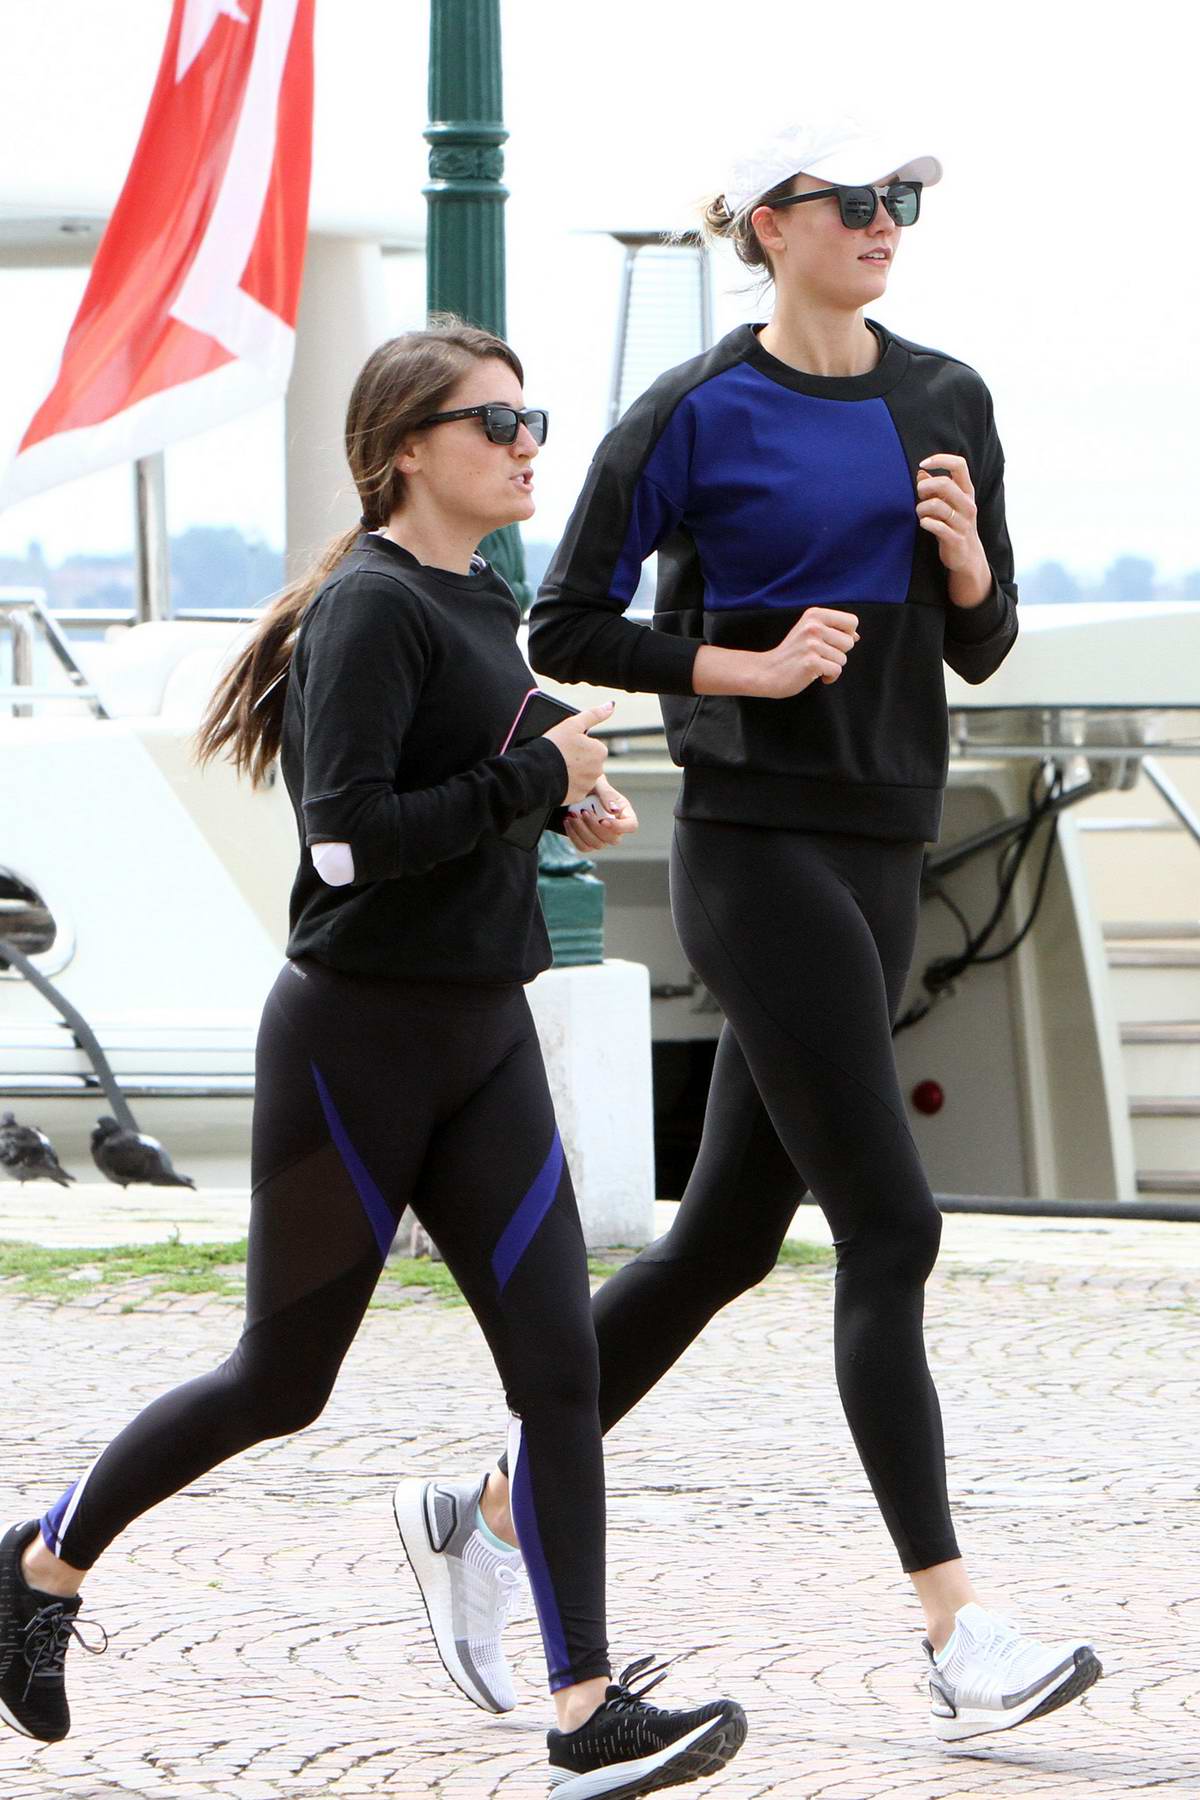 https://www.celebsfirst.com/wp-content/uploads/2019/05/karlie-kloss-wears-a-blue-and-black-sweatshirt-with-black-leggings-while-out-for-a-run-in-venice-italy-110519_8.jpg